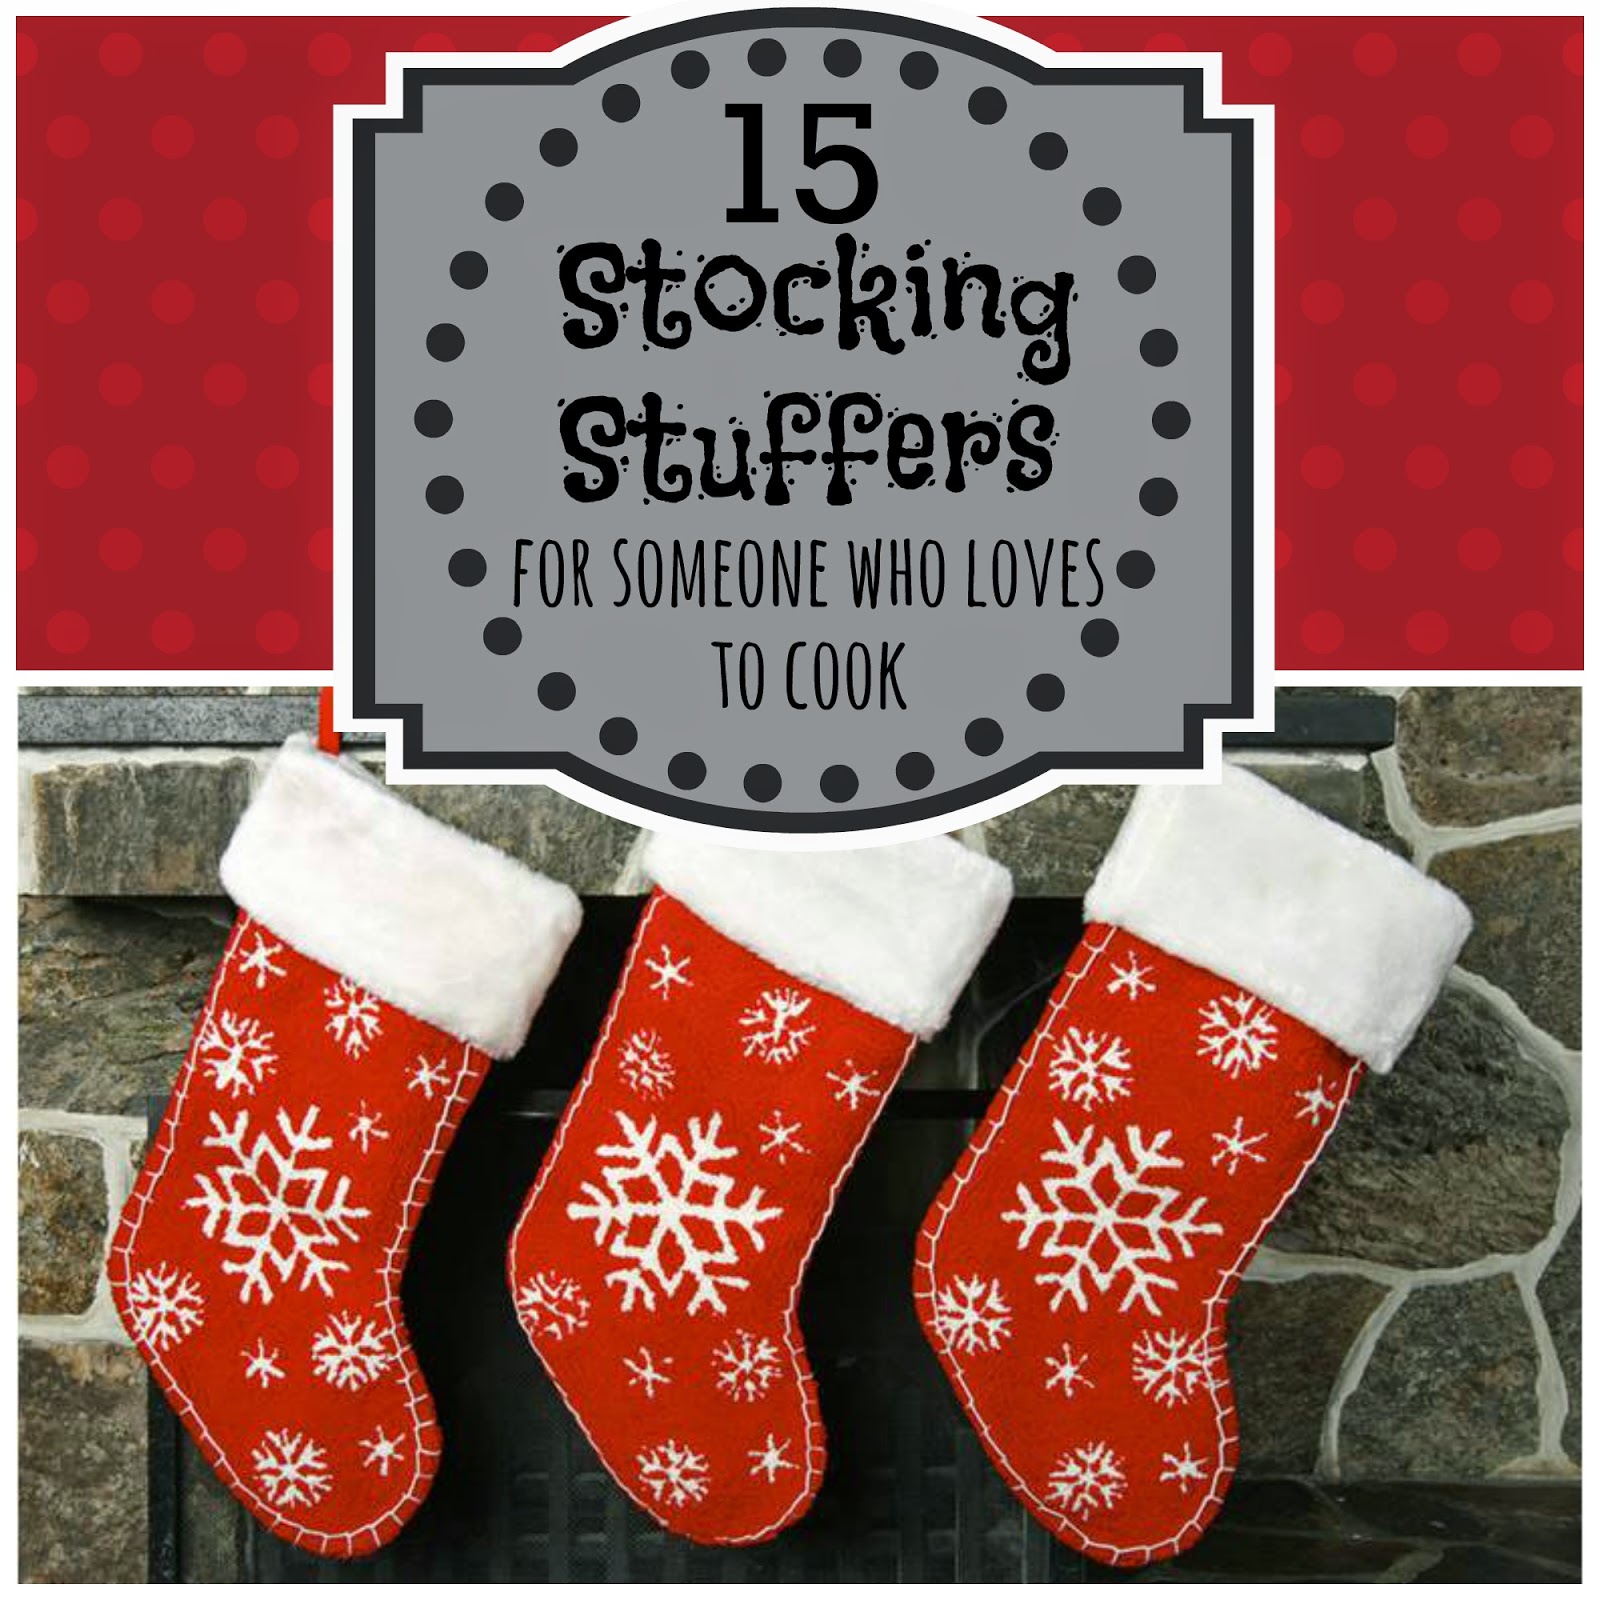 50+ Stocking Stuffer Ideas for People Who Love to Cook - Christmas